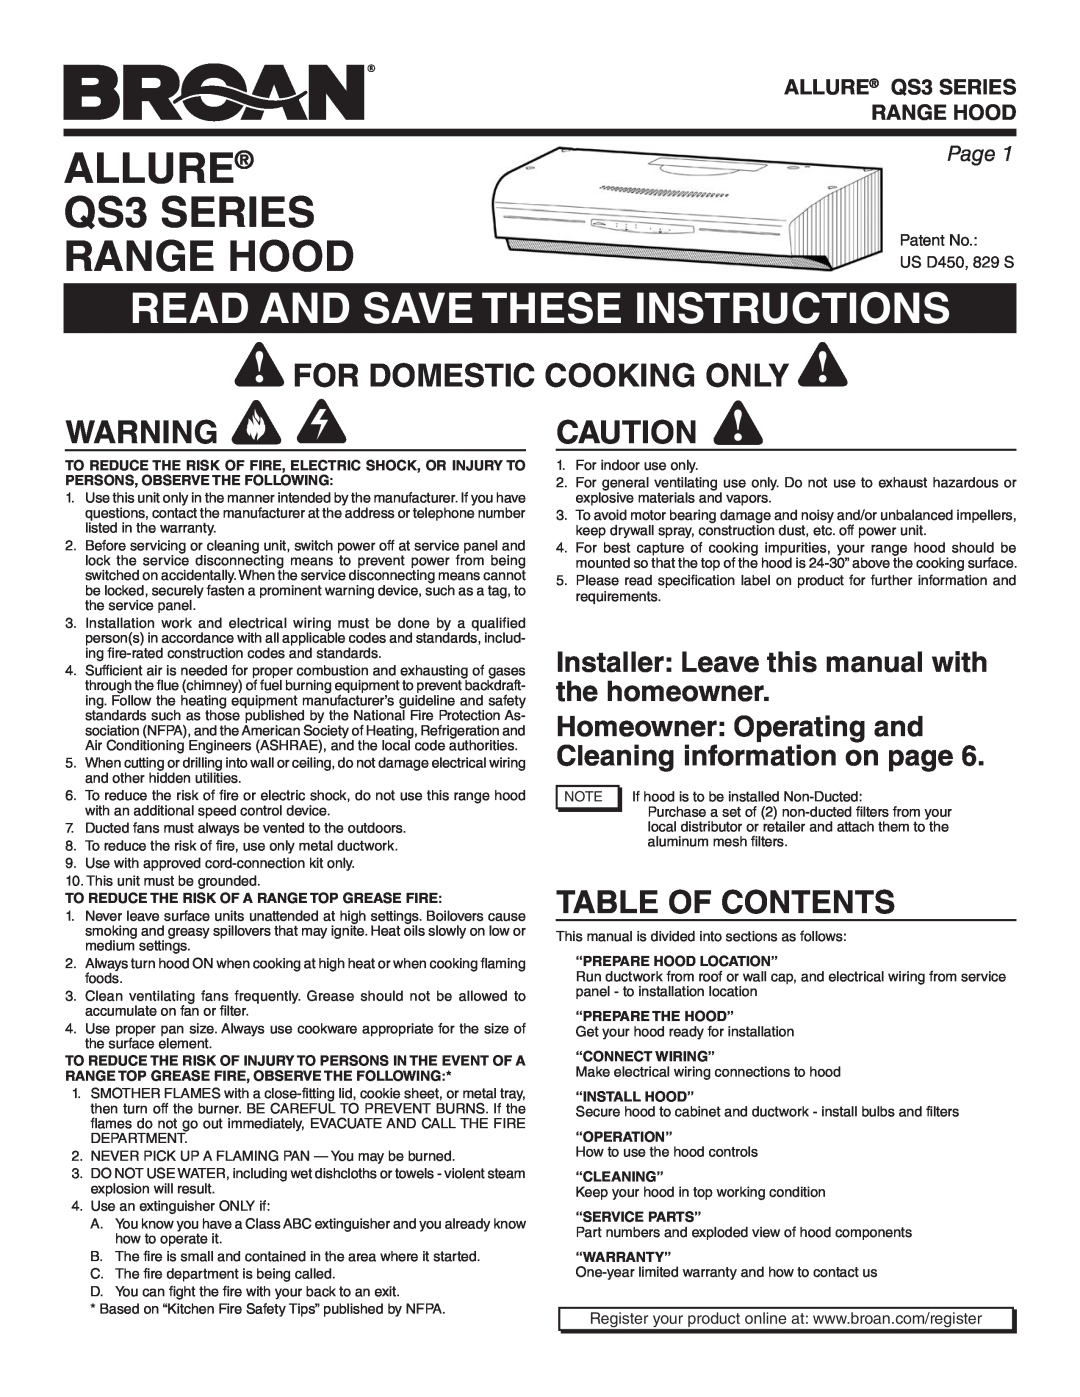 Broan QS342SS warranty ALLURE QS3 SERIES RANGE HOOD, Read And Save These Instructions, For Domestic Cooking Only, Page 